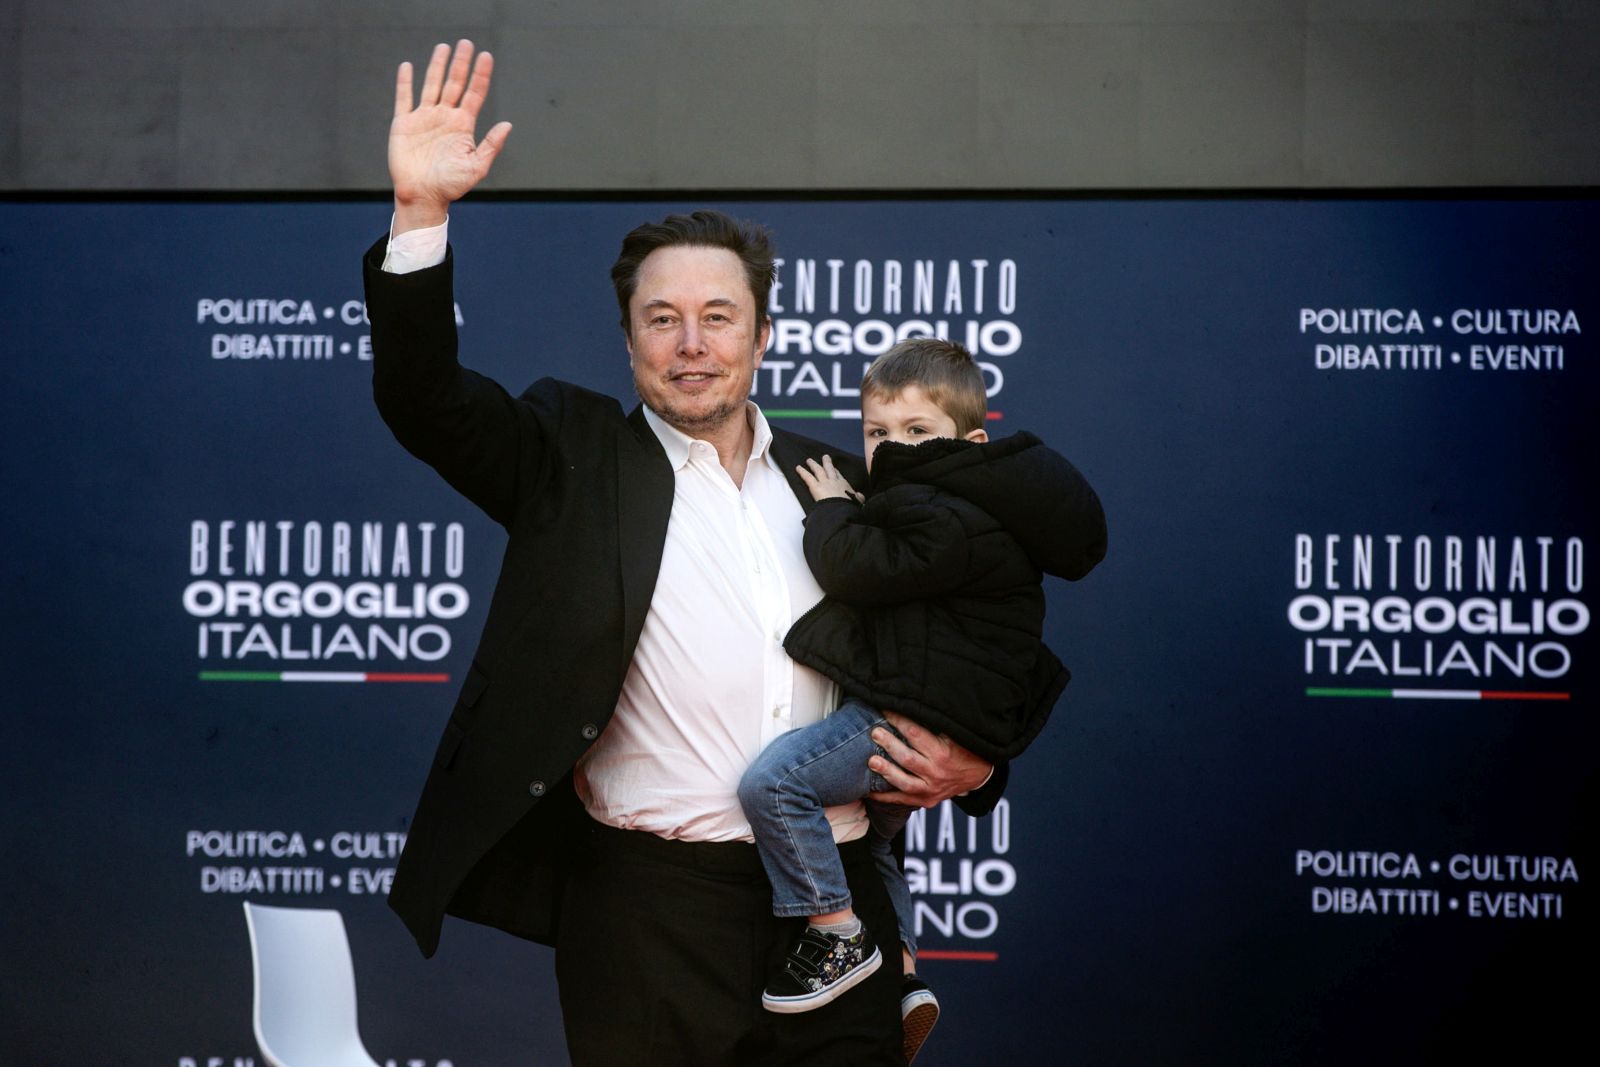 epa11032178 US tech entrepreneur Elon Musk, owner of Tesla, SpaceX and X, waves as he attends the third day of the Atreju 2023 political festival in the gardens of Castel Sant'Angelo, Rome, Italy, 16 December 2023. The Atreju political festival in Rome was organized by Italian Prime Minister Meloni and her right-wing party, Brothers of Italy. The theme of this year's edition is 'Welcome Back Italian Pride' (Bentornato orgoglio italiano).  EPA/ANGELO CARCONI